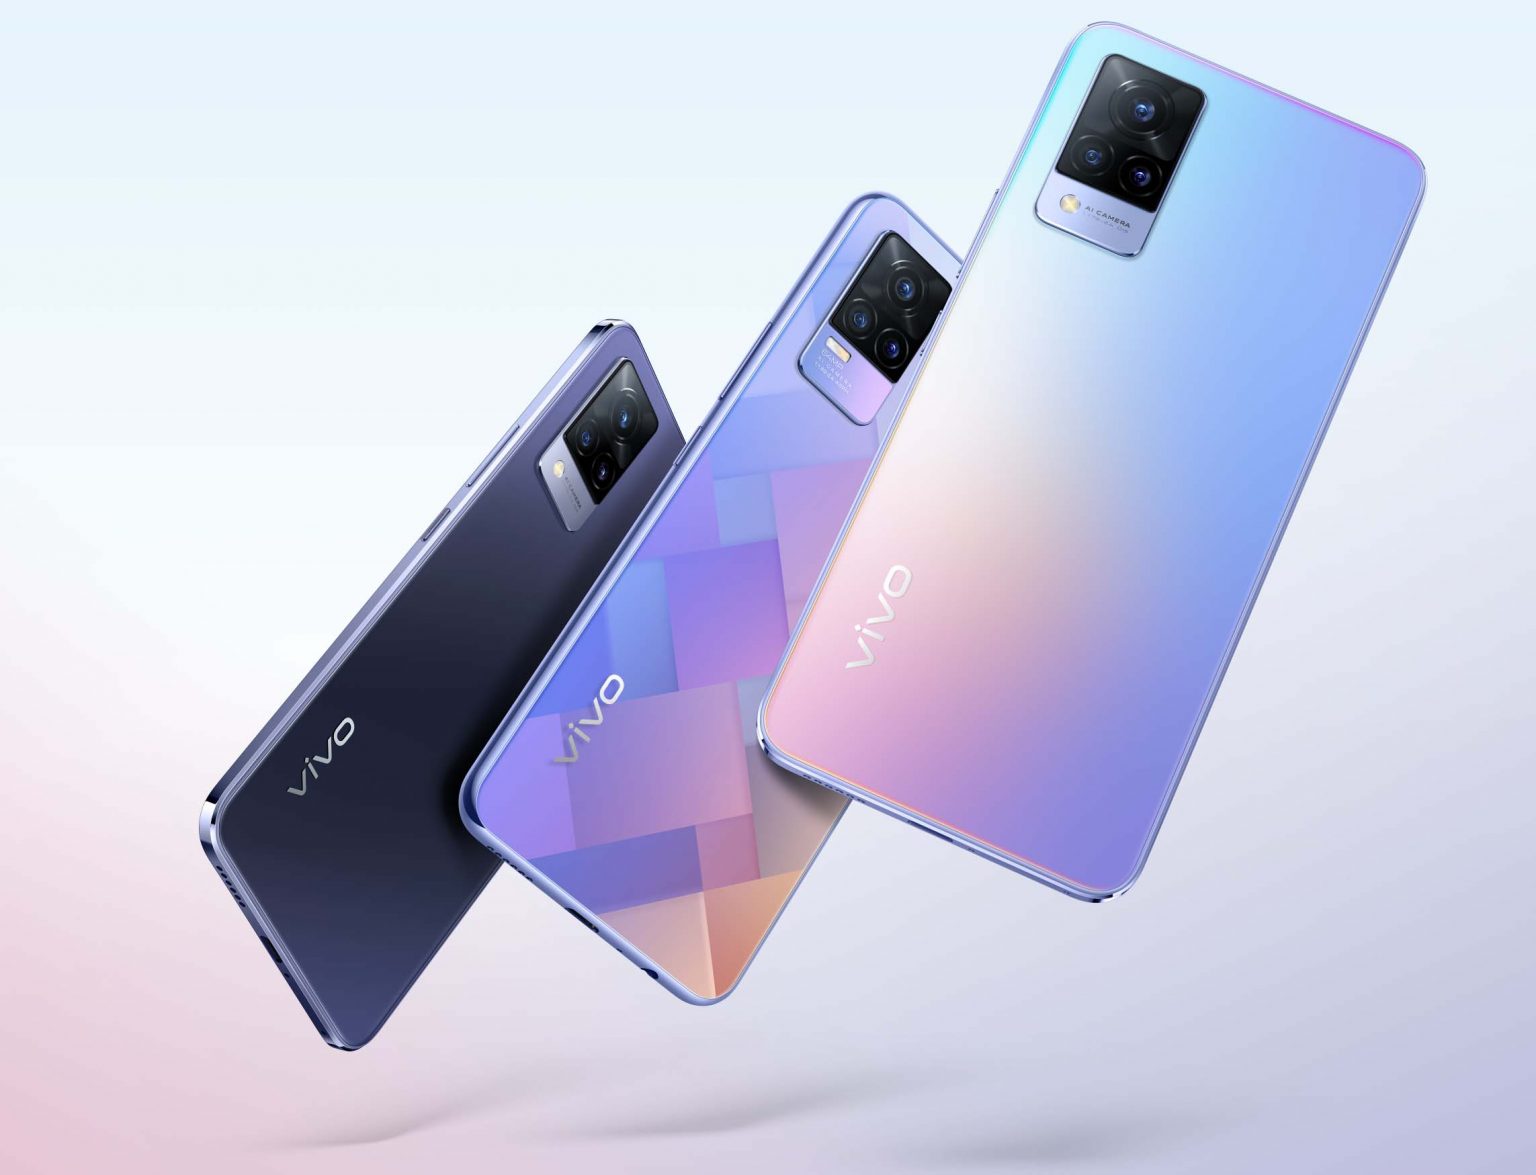 vivo V21 series now available in four colors, starting at PHP 17,999